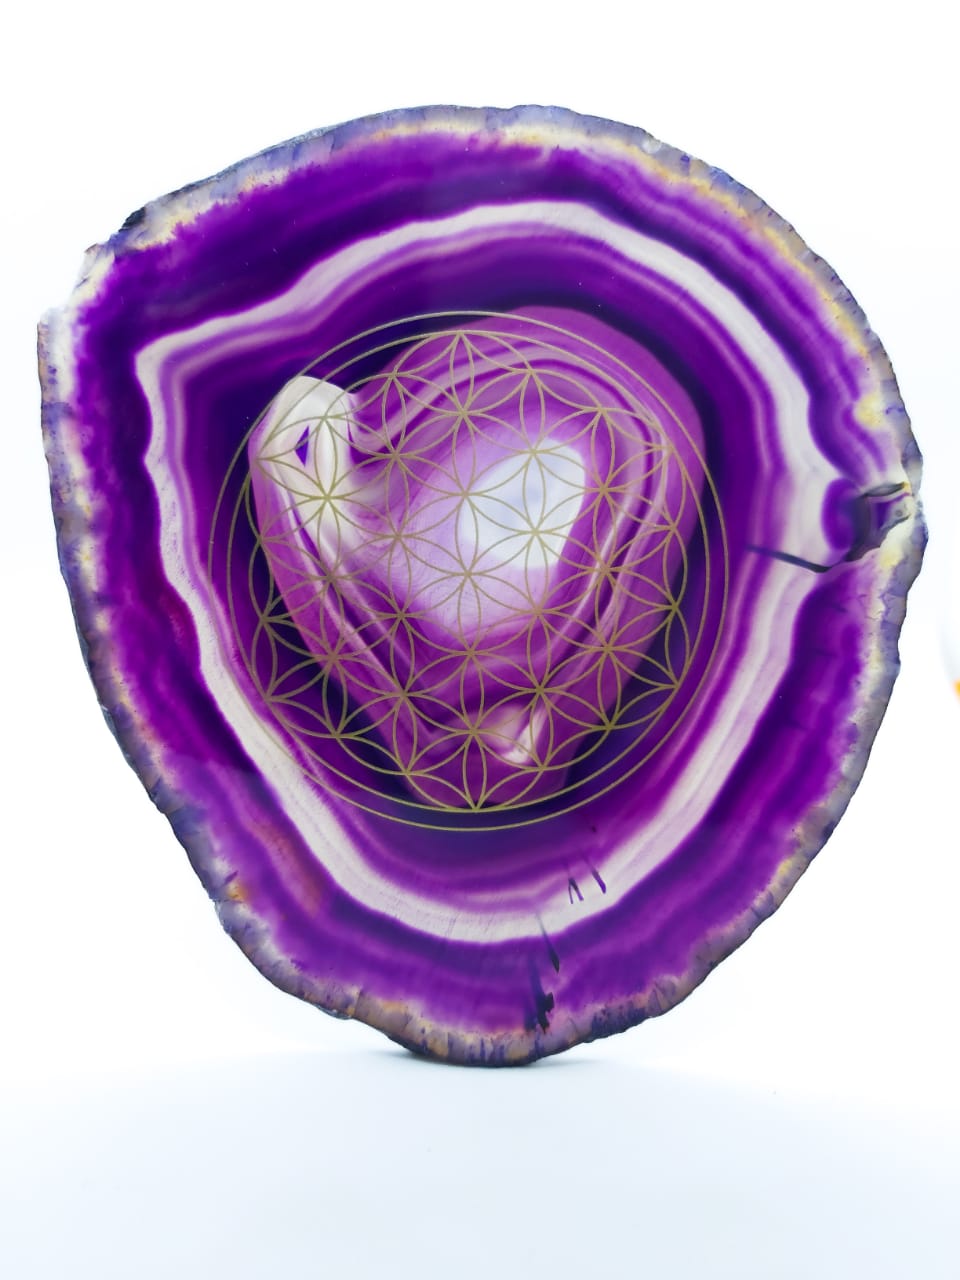 Flower of life on a natural shape agate gemstone